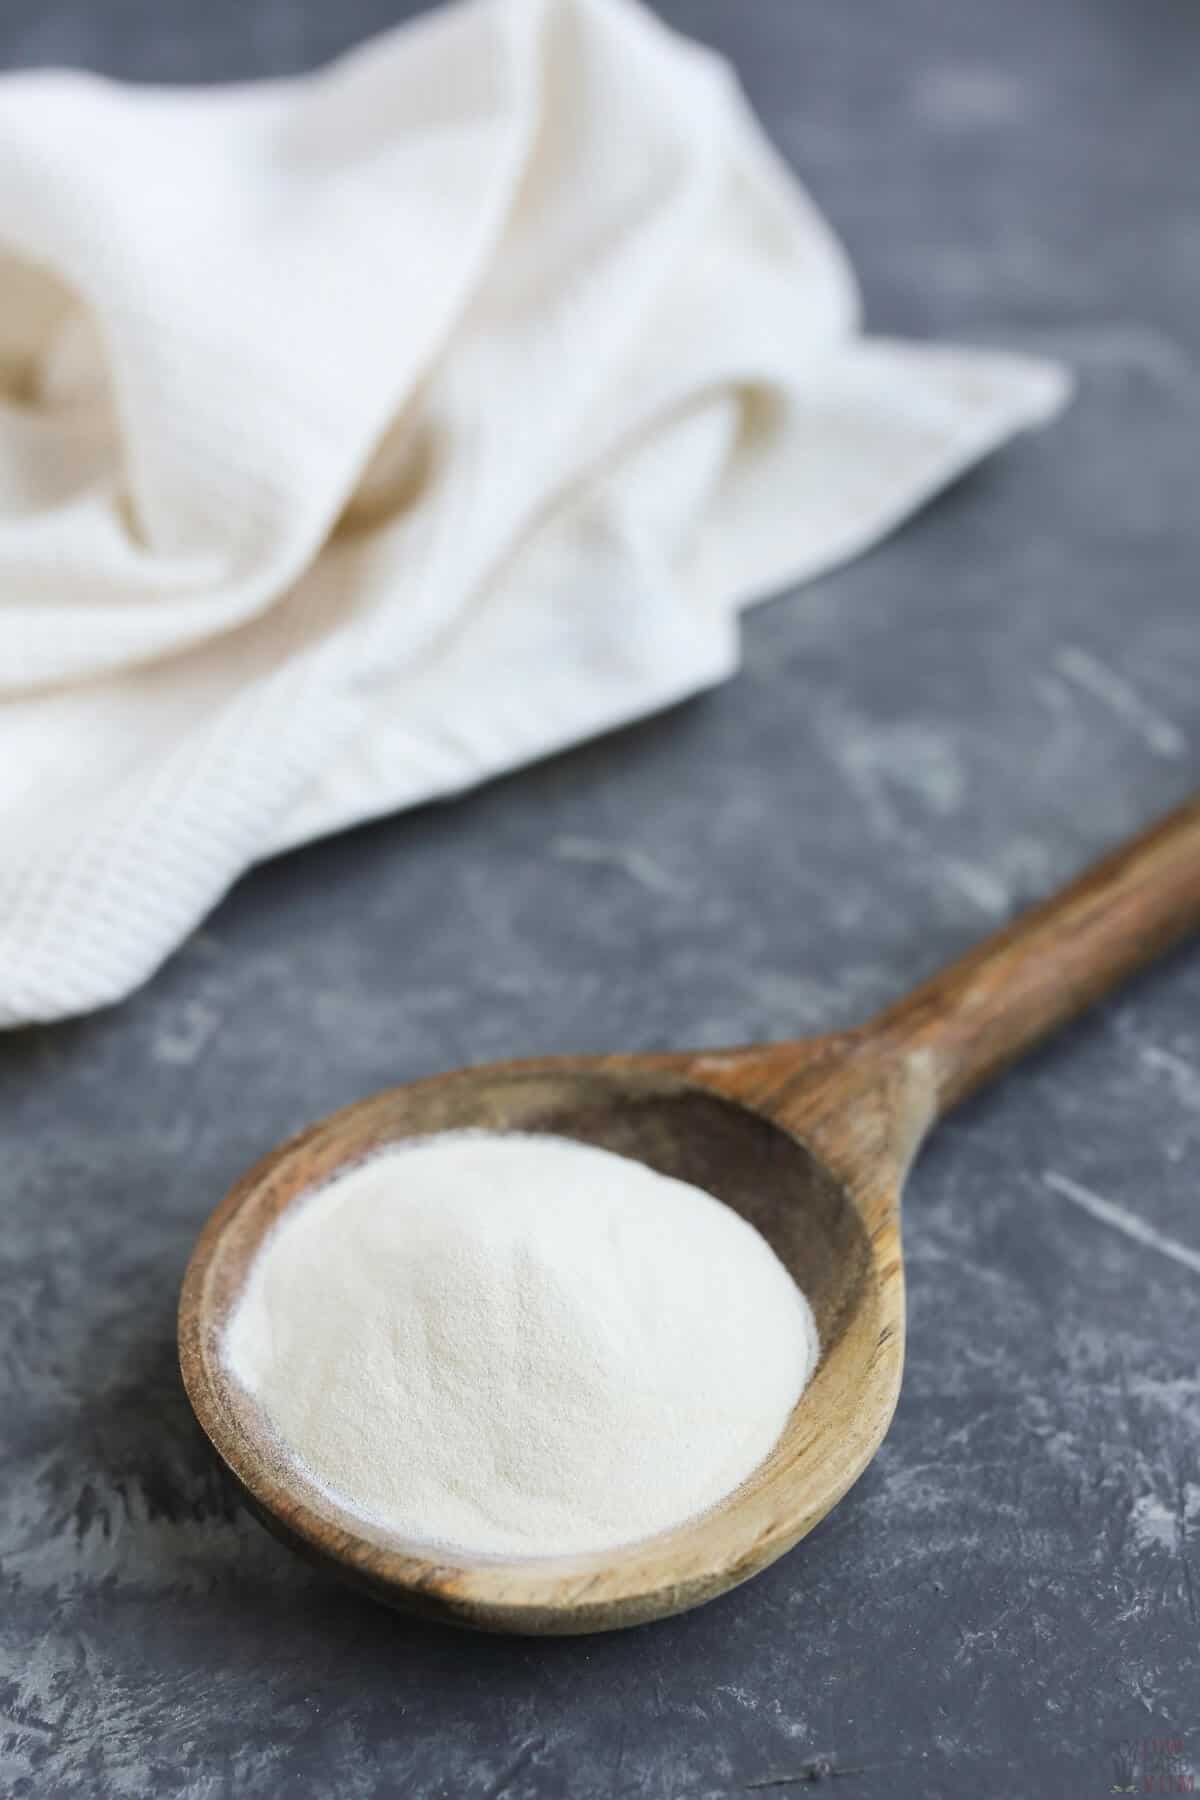 xanthan gum on large wooden spoon with white linen